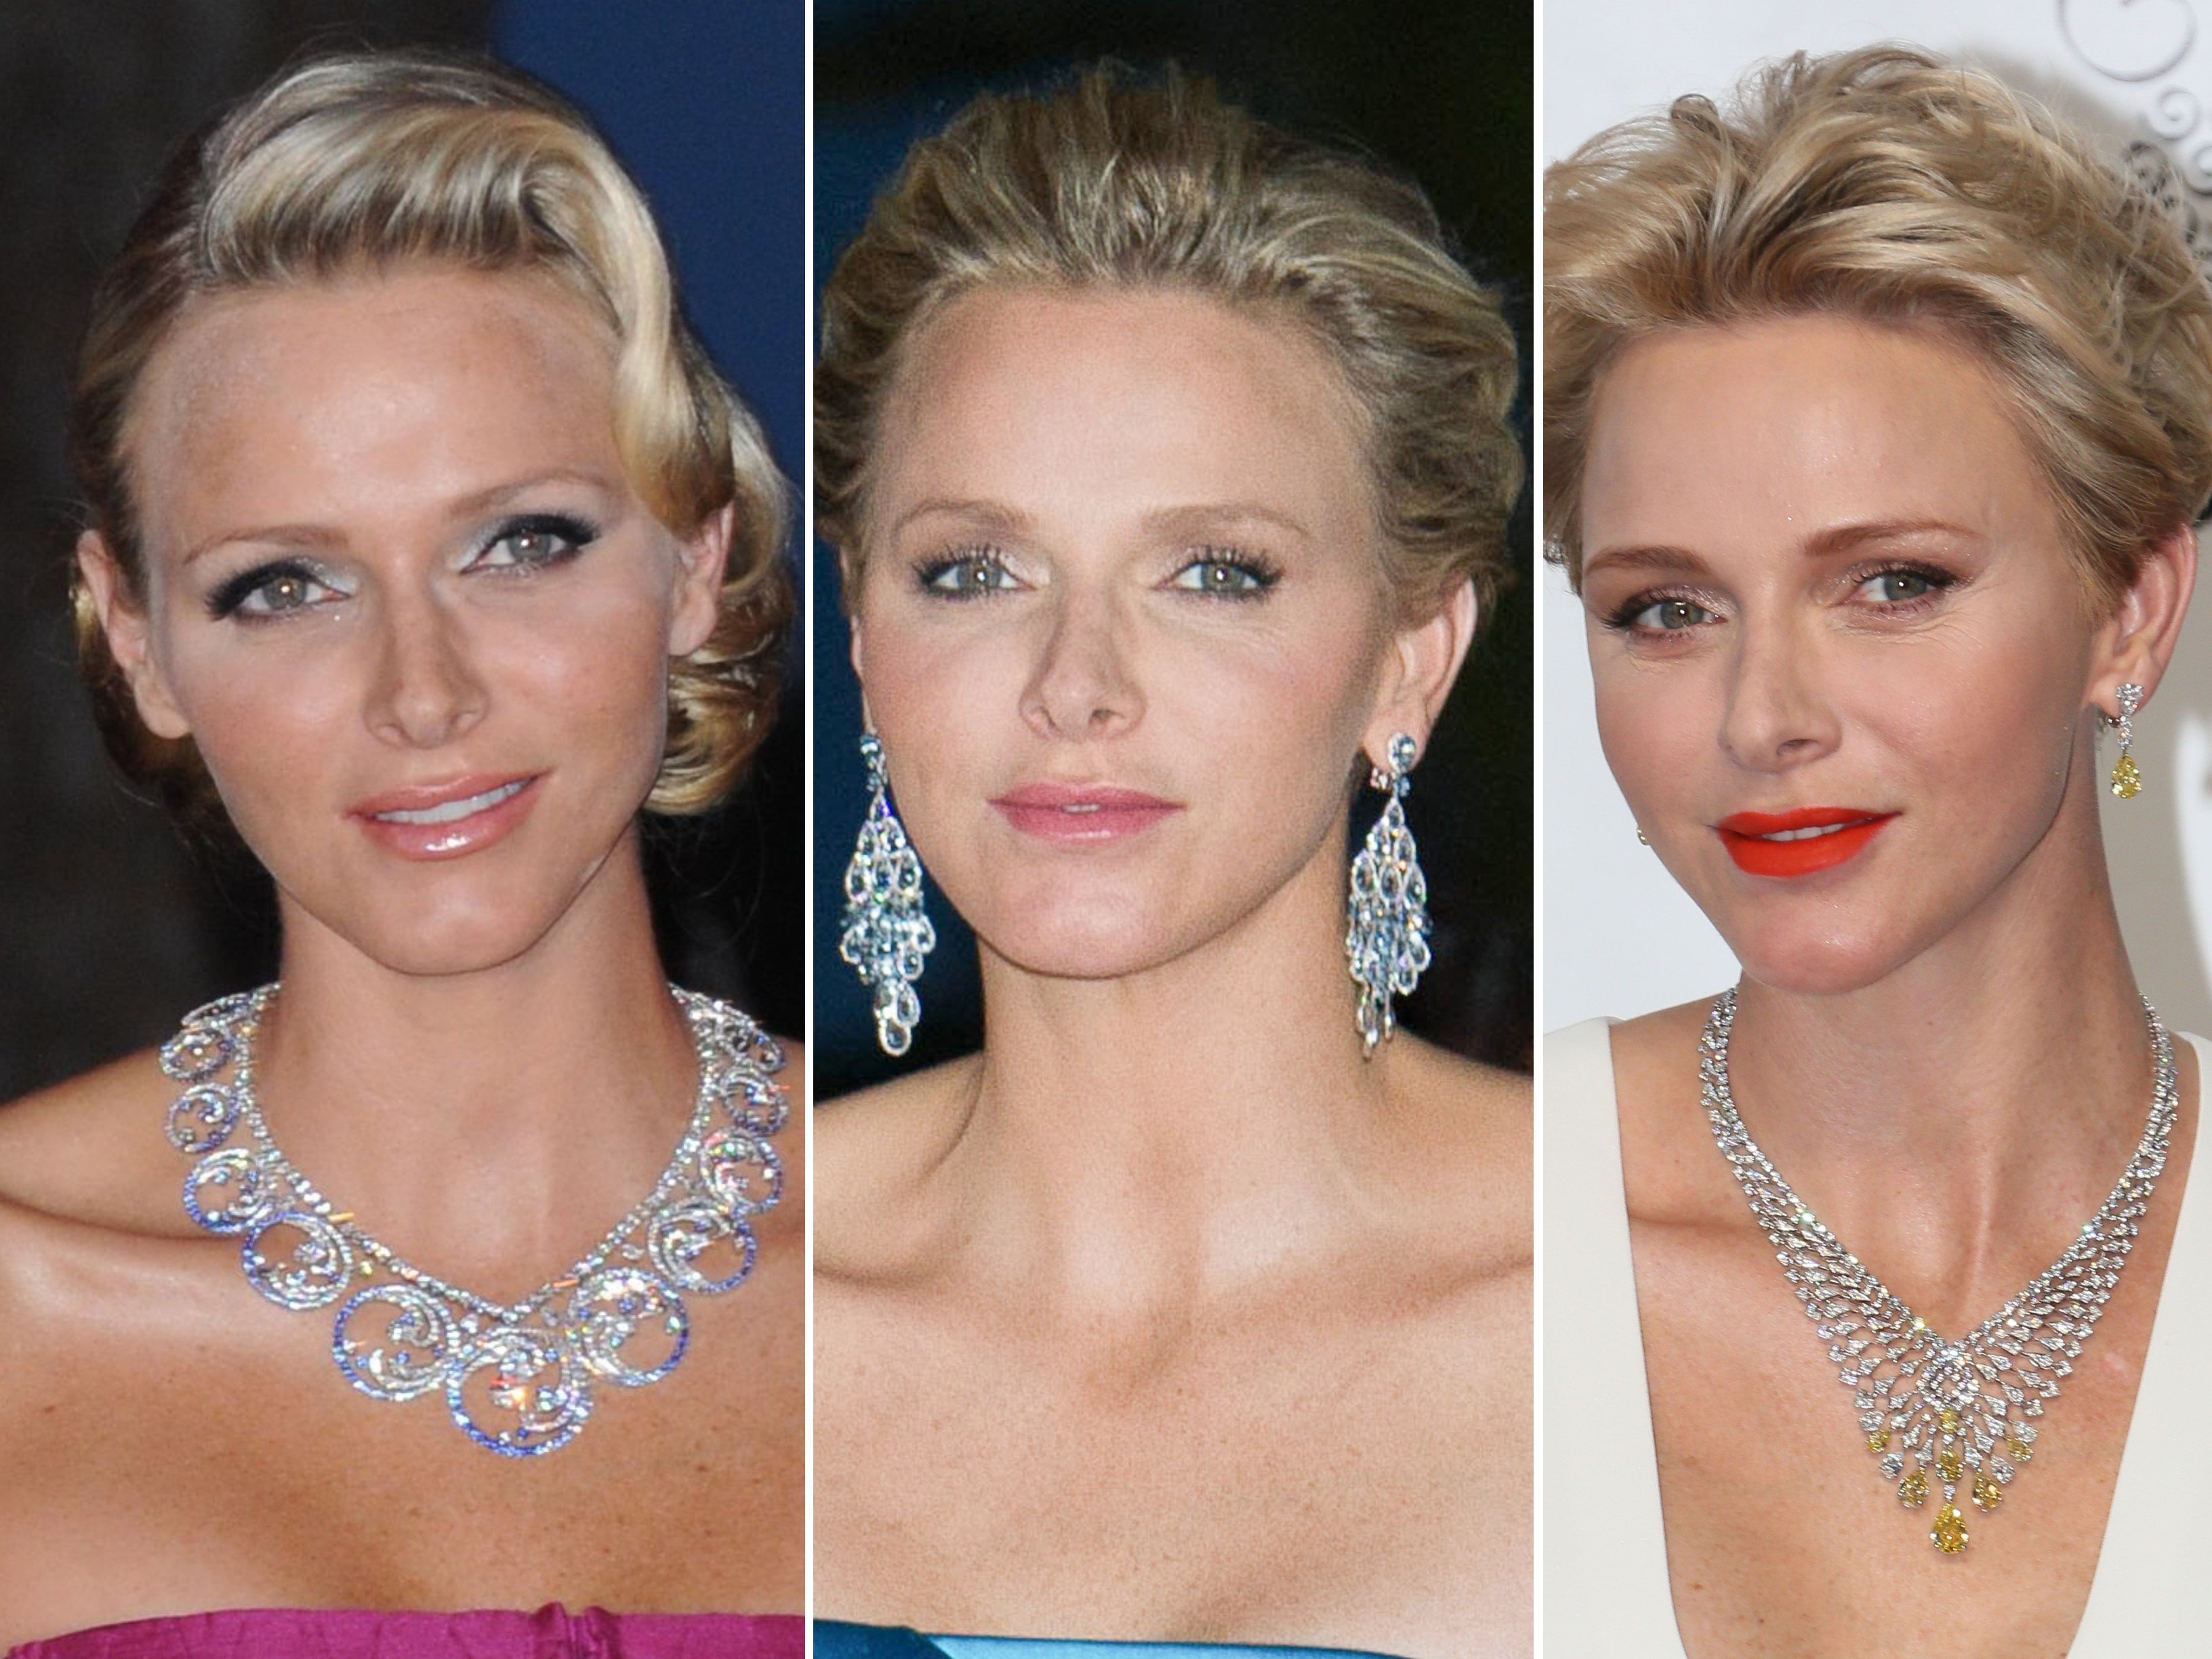 From Van Cleef & Arpels to Graff, Princess Charlene of Monaco definitely loves her classy (and pricey!) blinging pieces. Photos: SCMP, Getty Images, FilmMagic